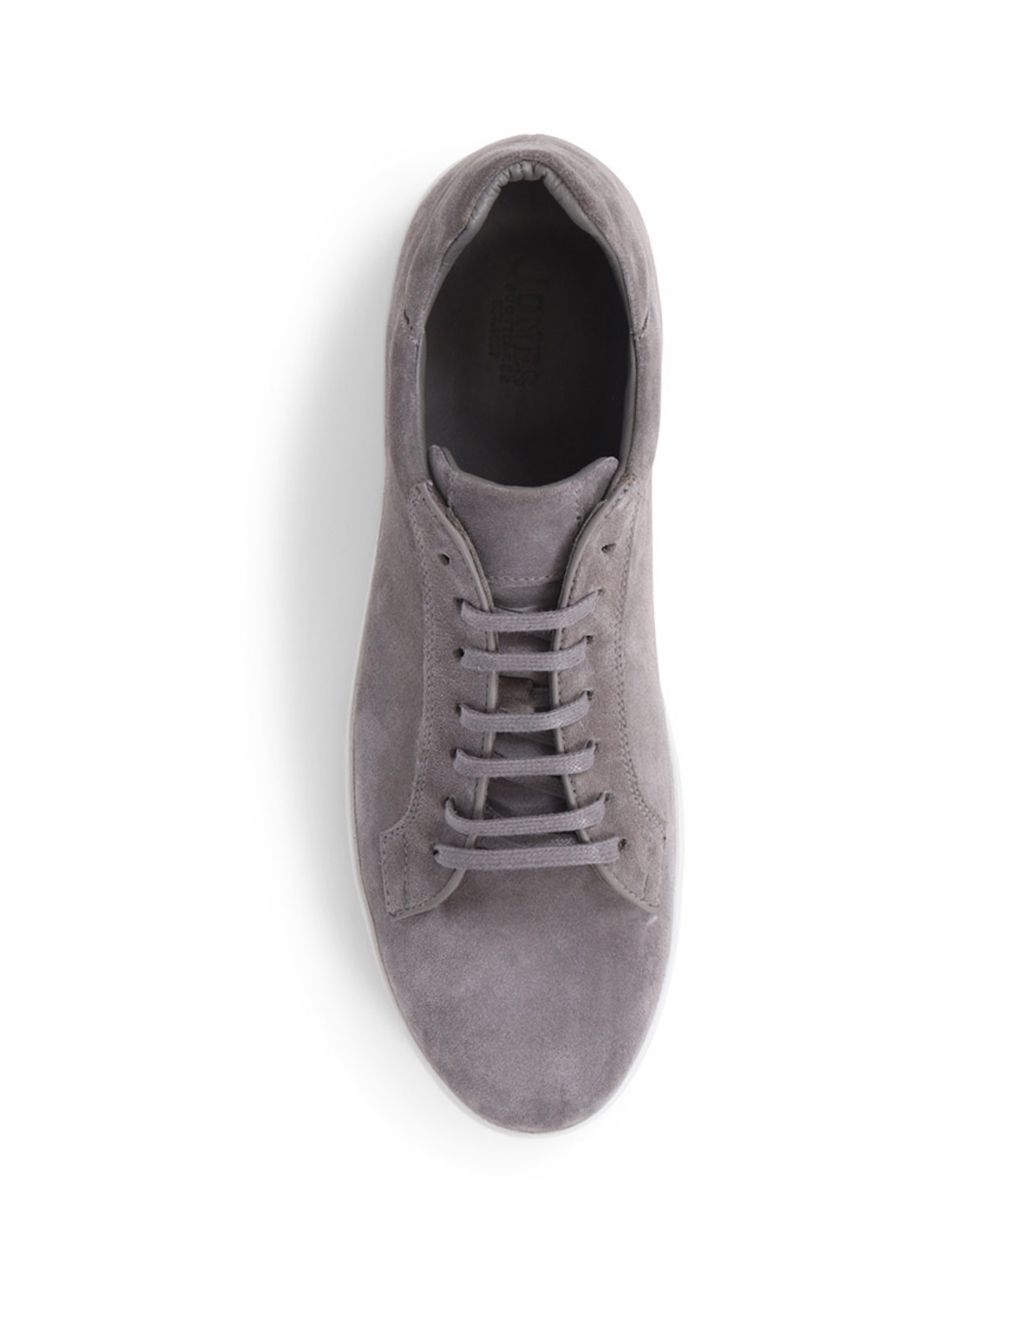 Suede Lace Up Trainers image 4